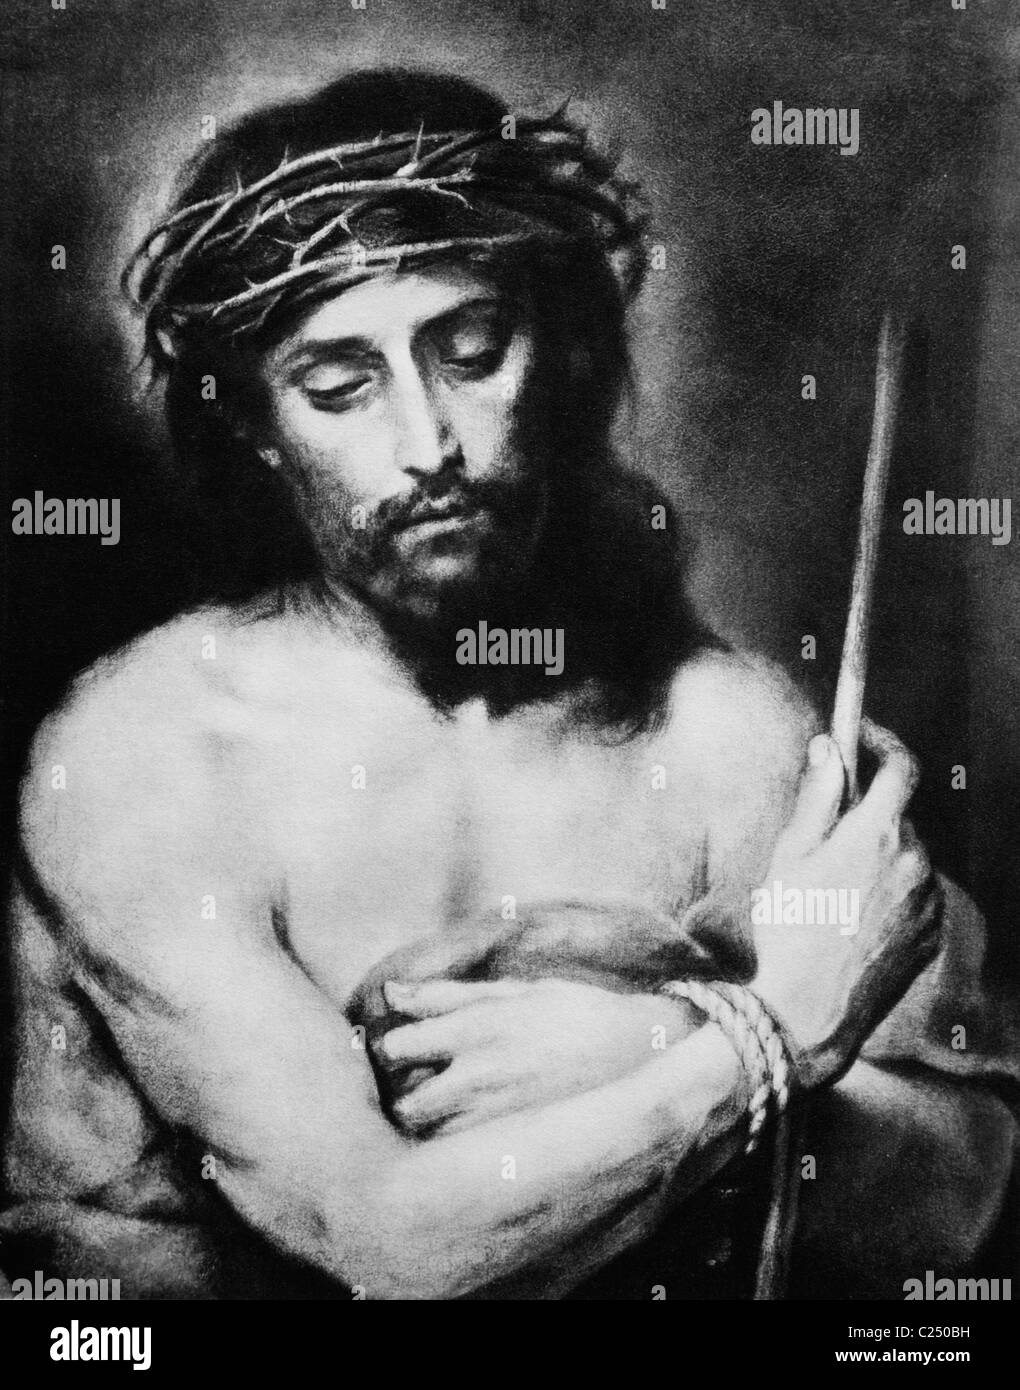 Jesus Christ by torture - black and white copy by Murillo Stock Photo